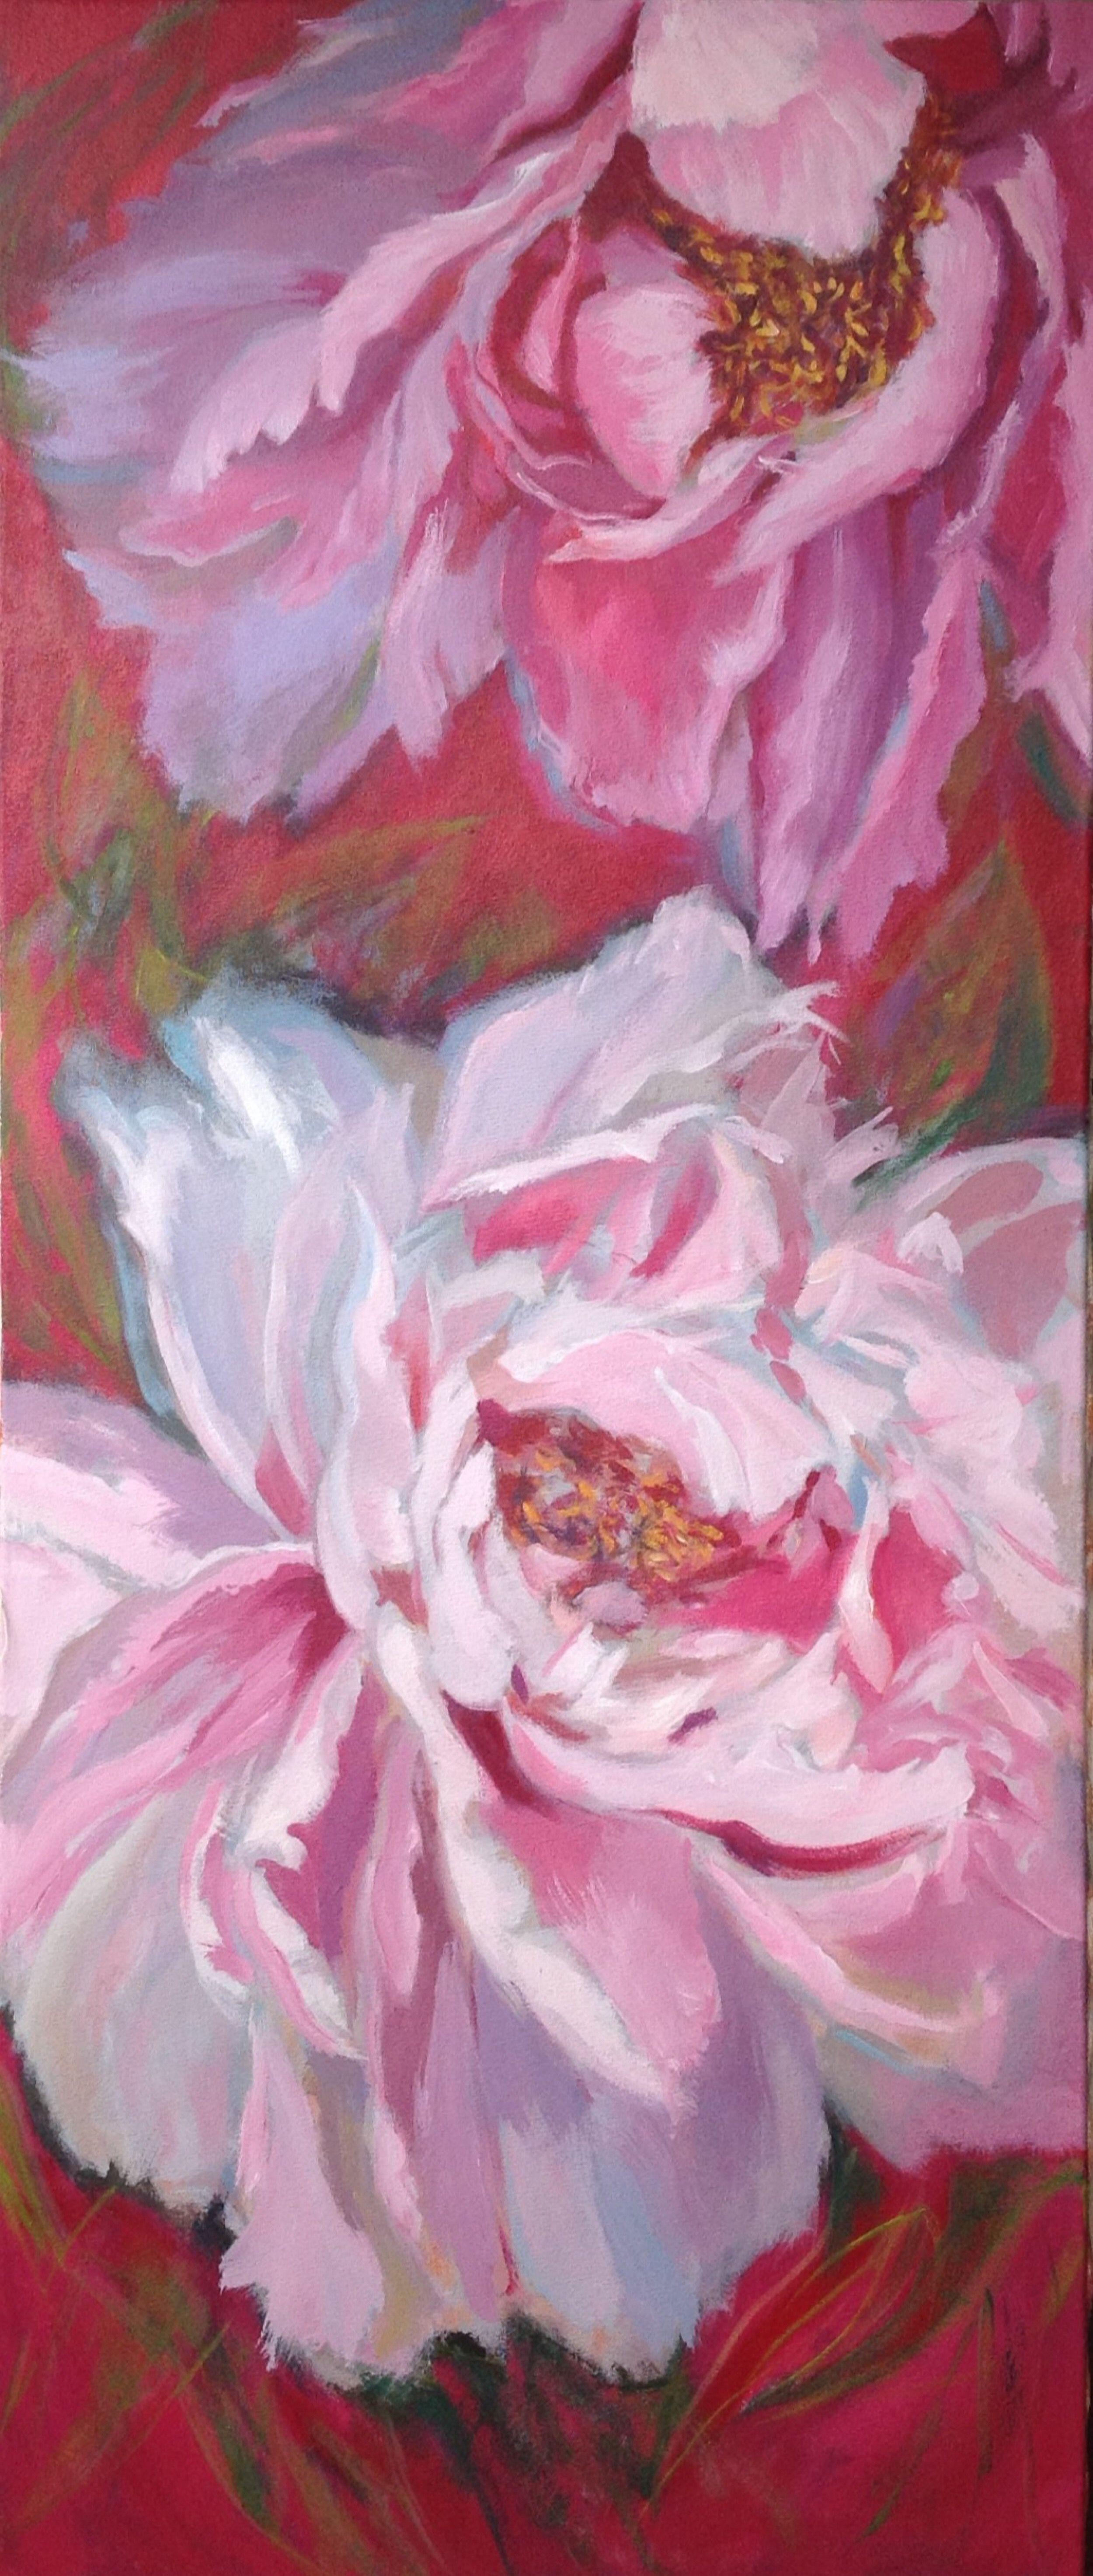 Acrylic on canvas. Belongs to a series I am making on flowers, trying with different kind of sizes of canvas and flowers. Two bloomed peonies. :: Painting :: Contemporary :: This piece comes with an official certificate of authenticity signed by the